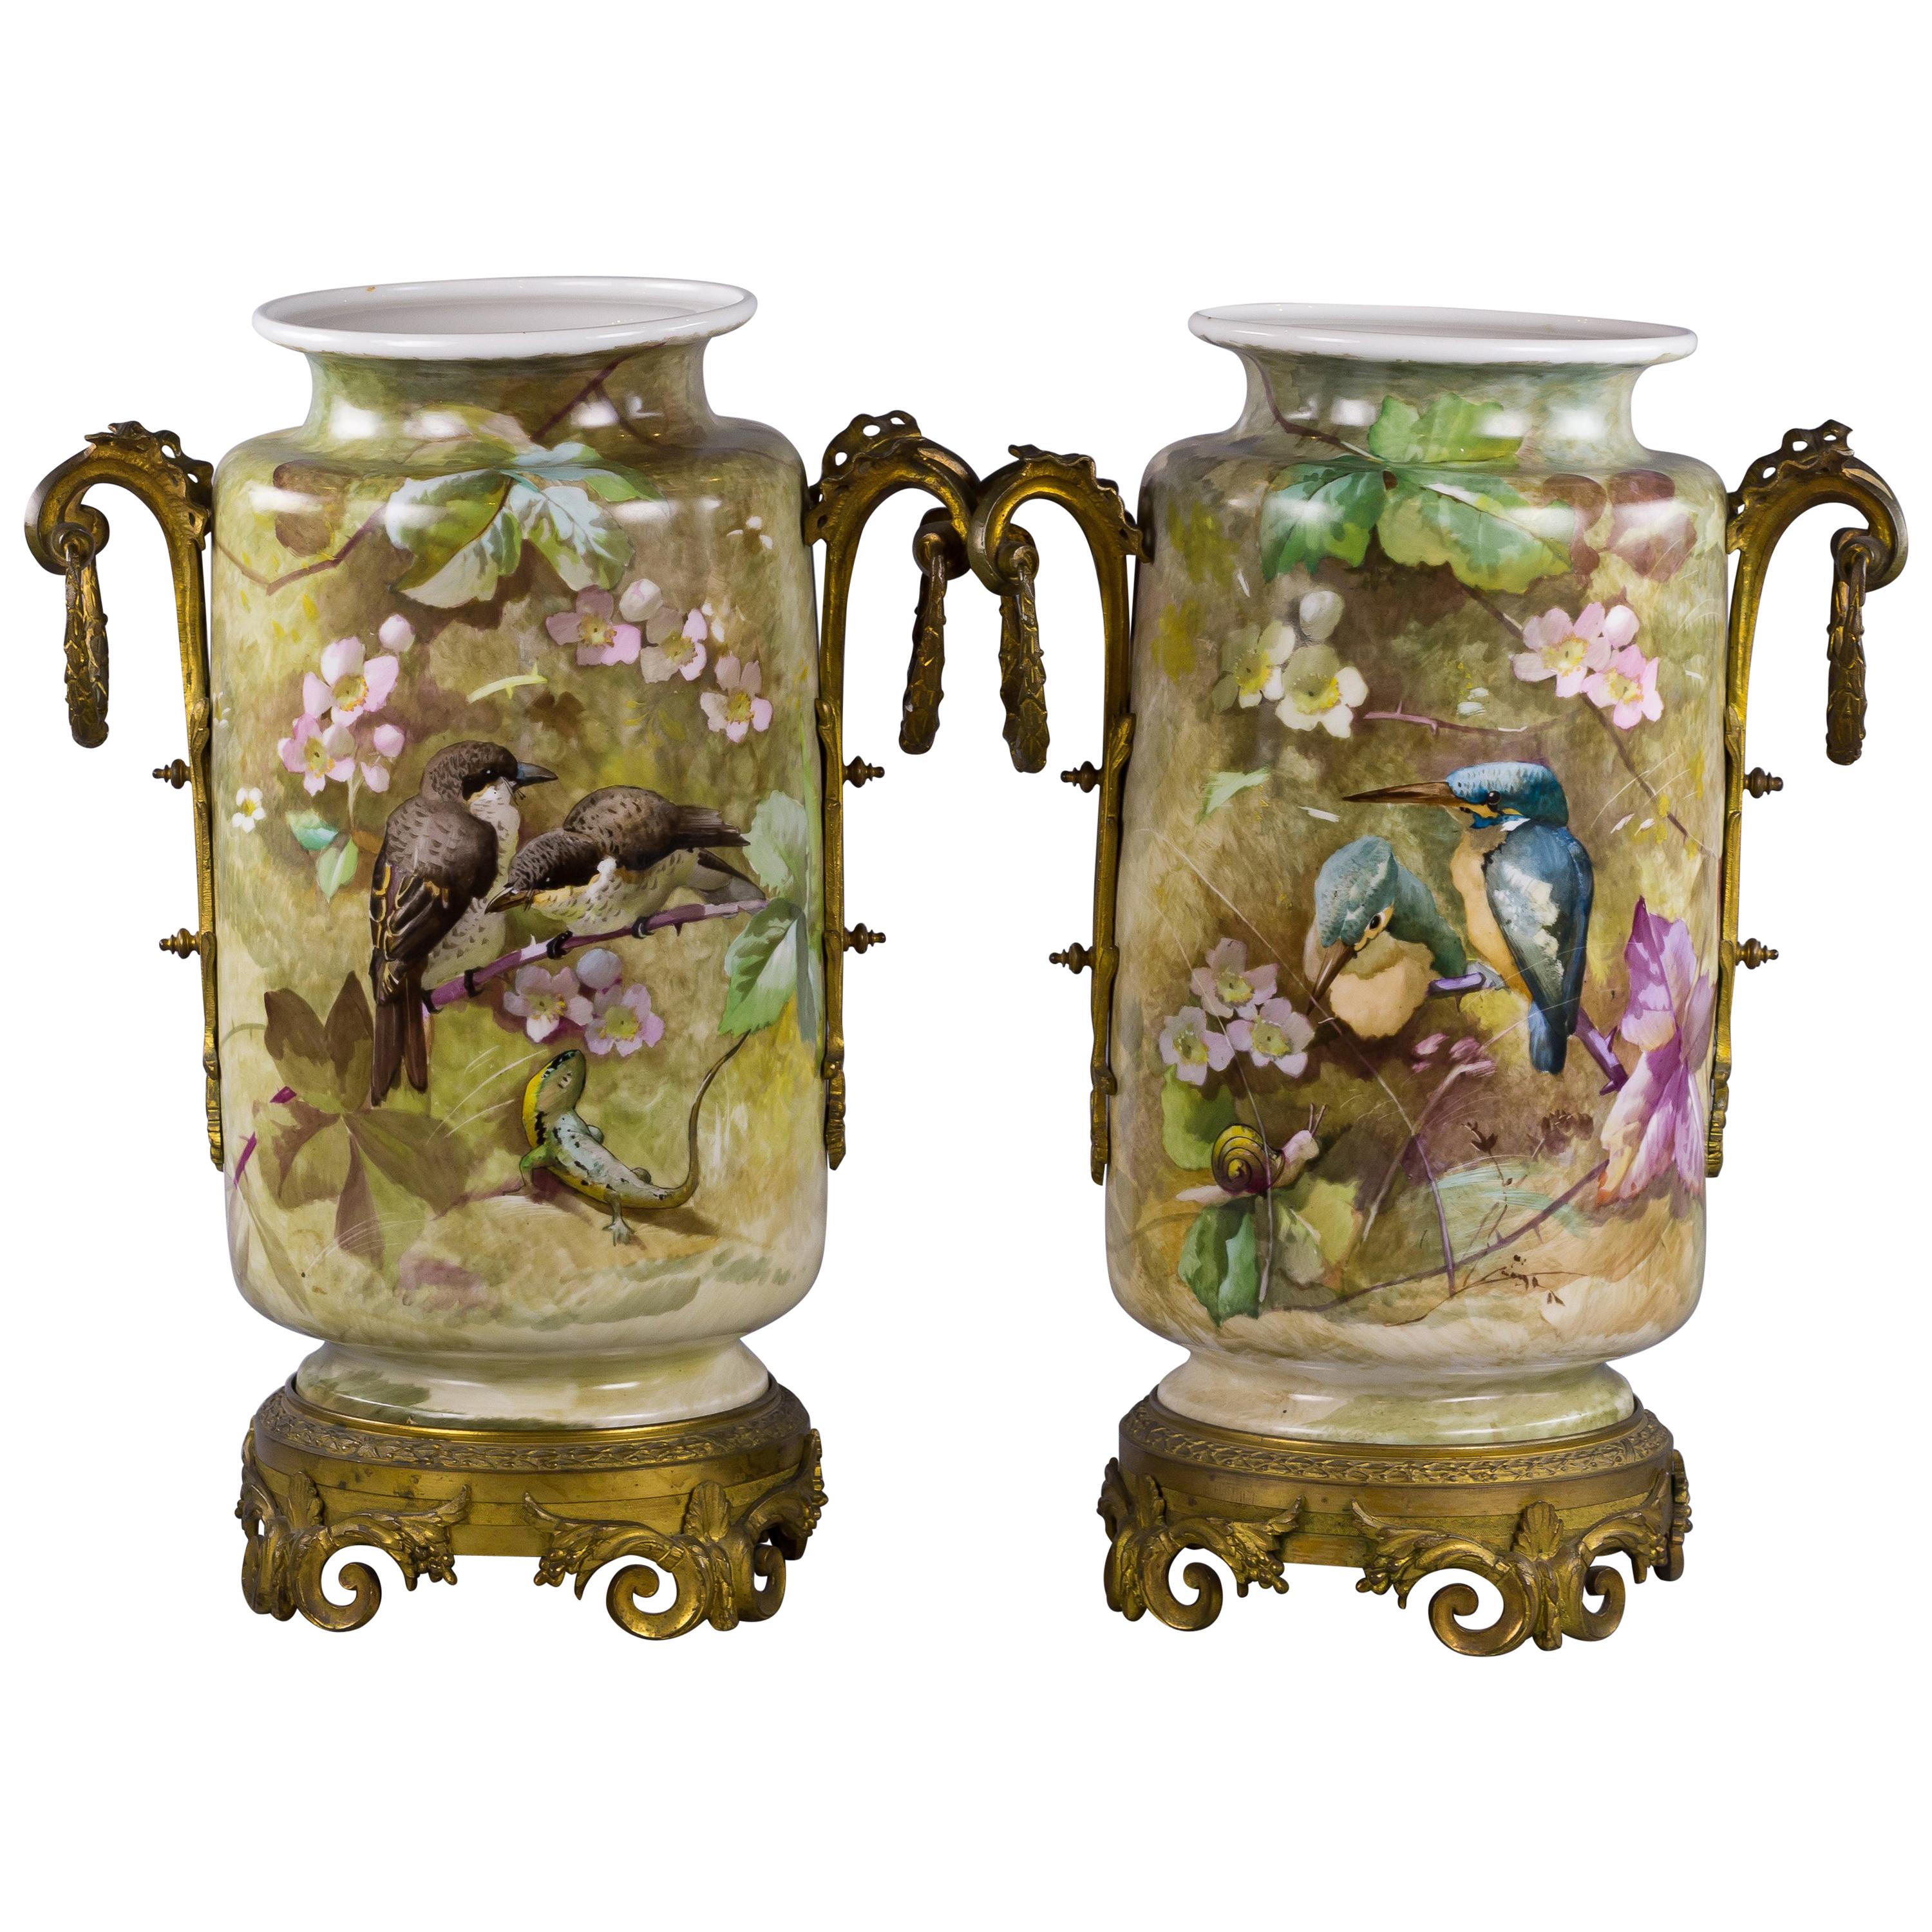 Pair of Bronze-Mounted French Porcelain Vases, circa 1880